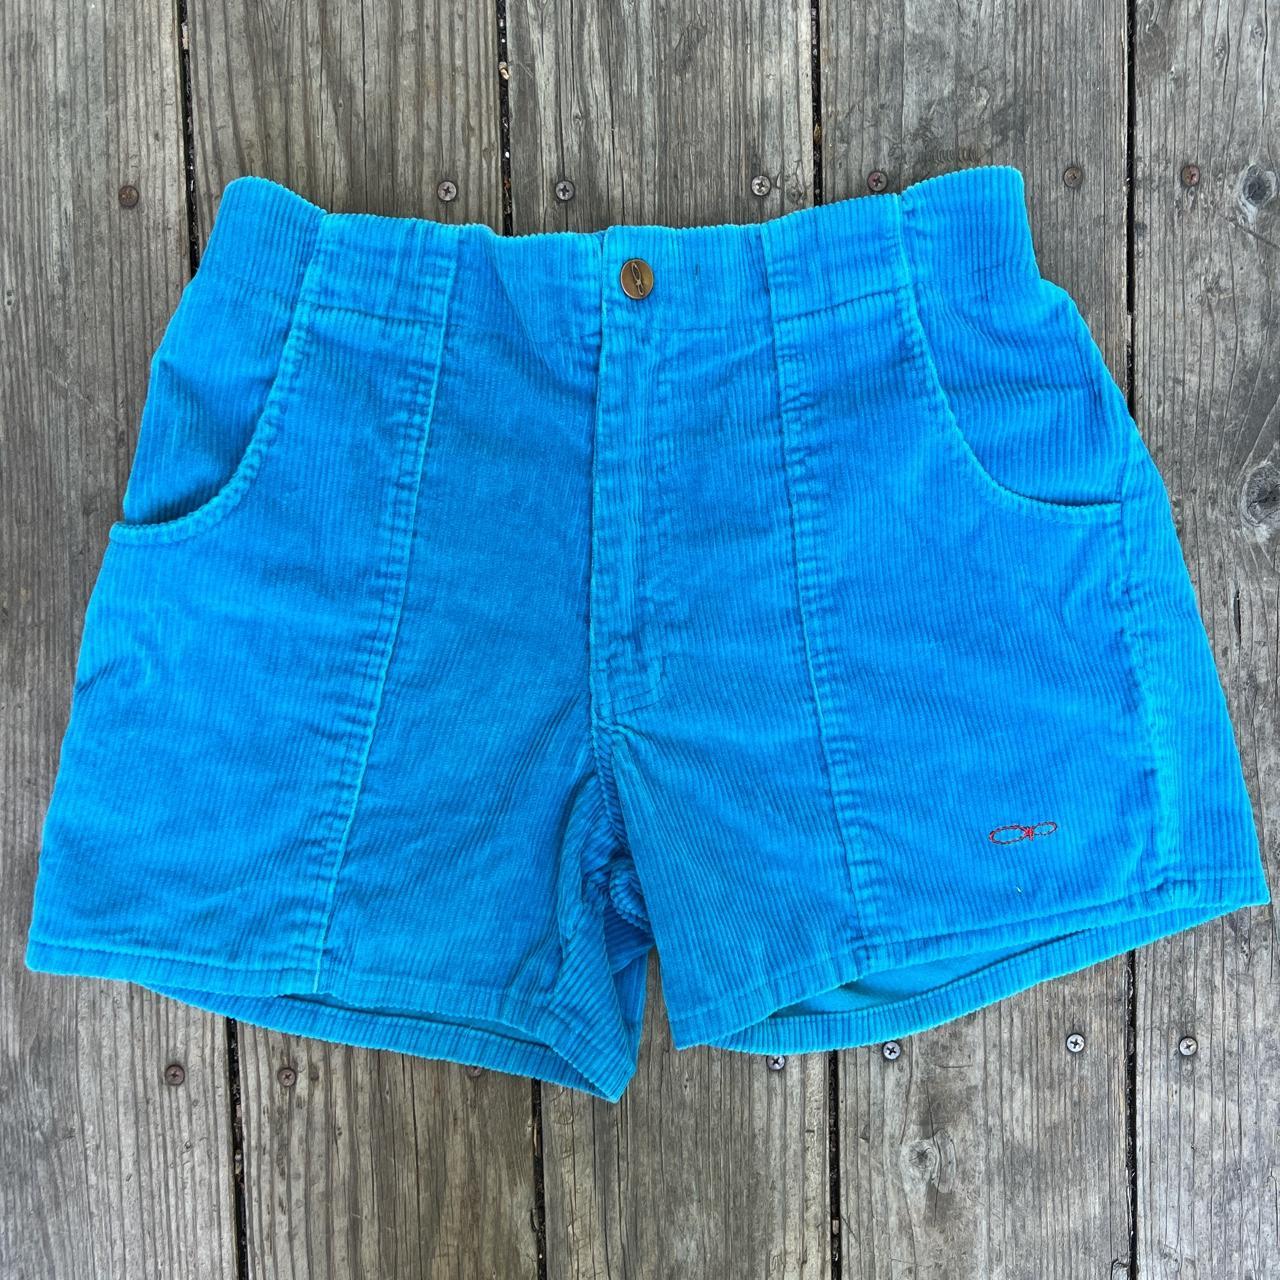 Vintage Corduroy Ocean Pacific Shorts From the... - Depop